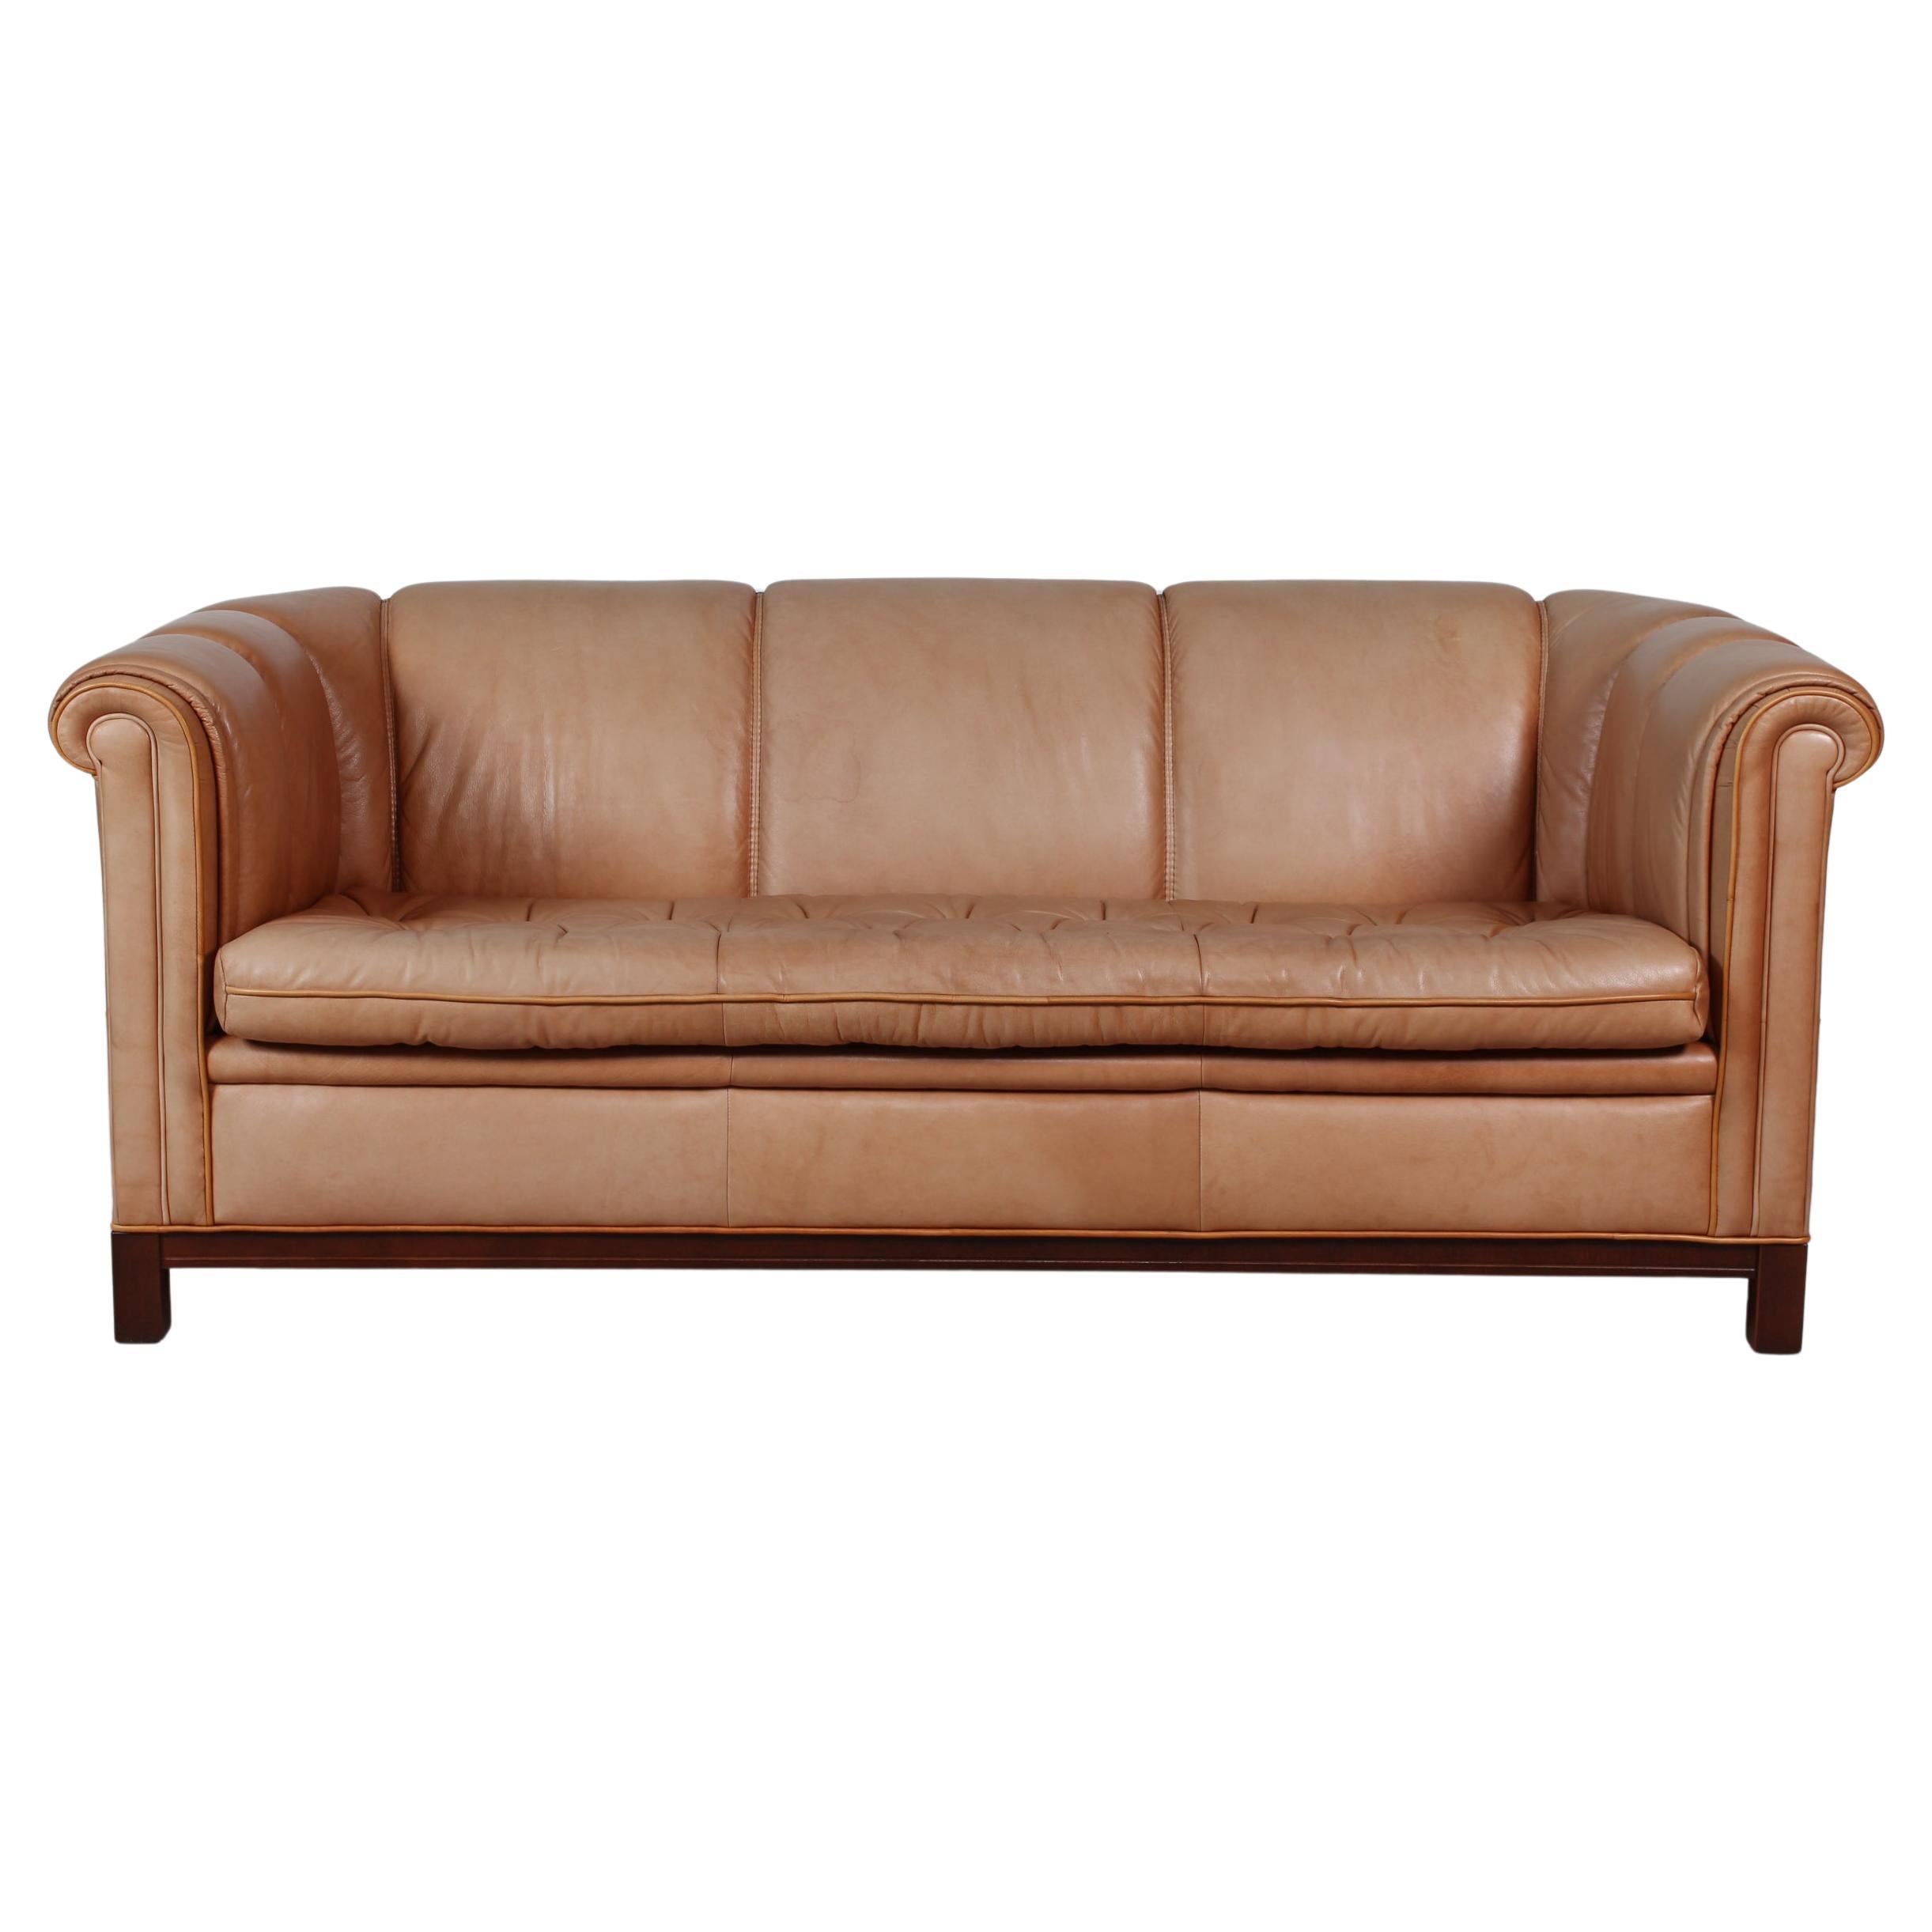 Vintage Chesterfield Sofa and Couch Cognac Leather and Mahogany Frame, 1970s For Sale